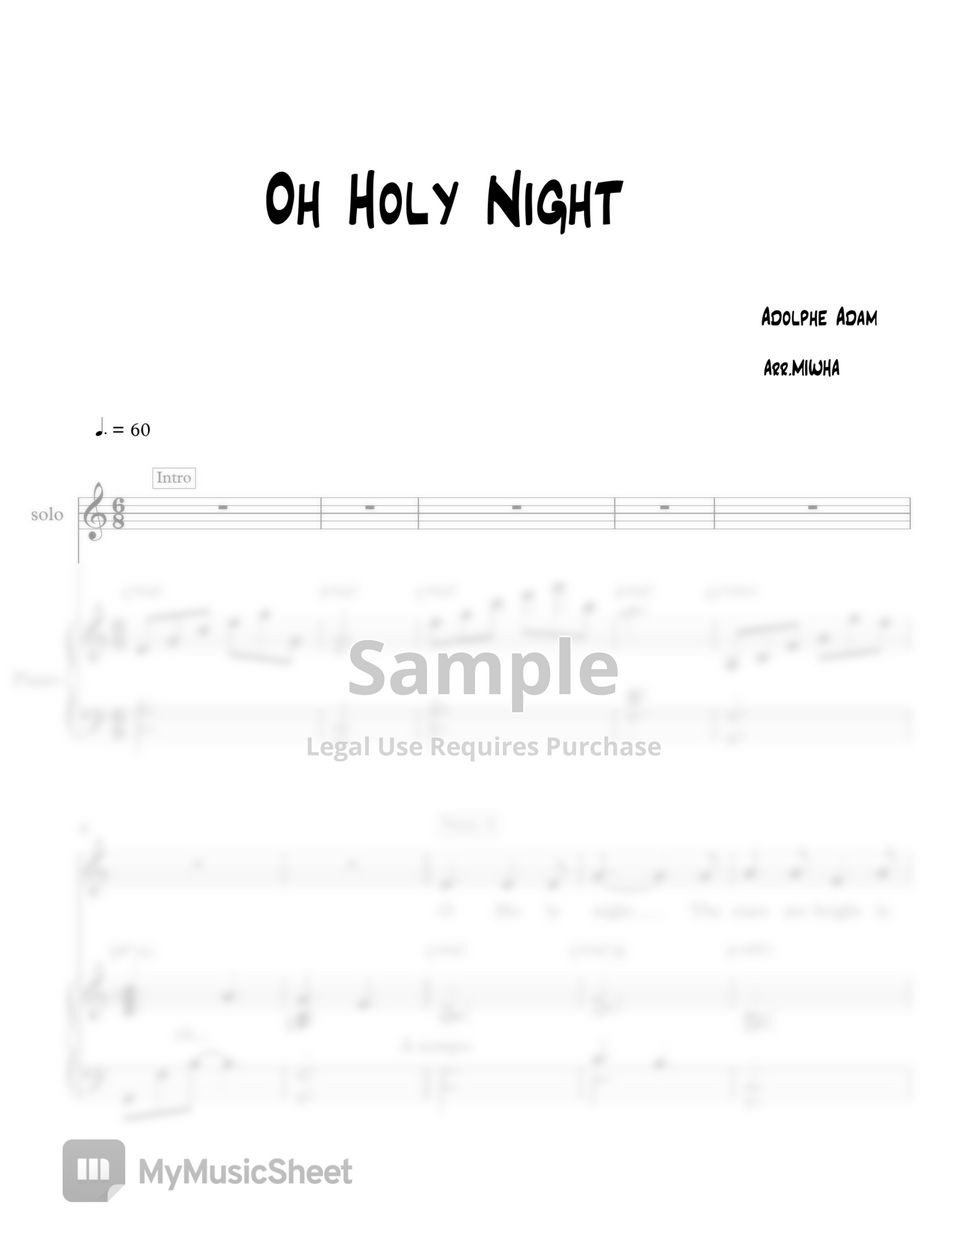 Adolphe Charles Adams - Oh Holy Night in C (재즈 스타일) by MIWHA